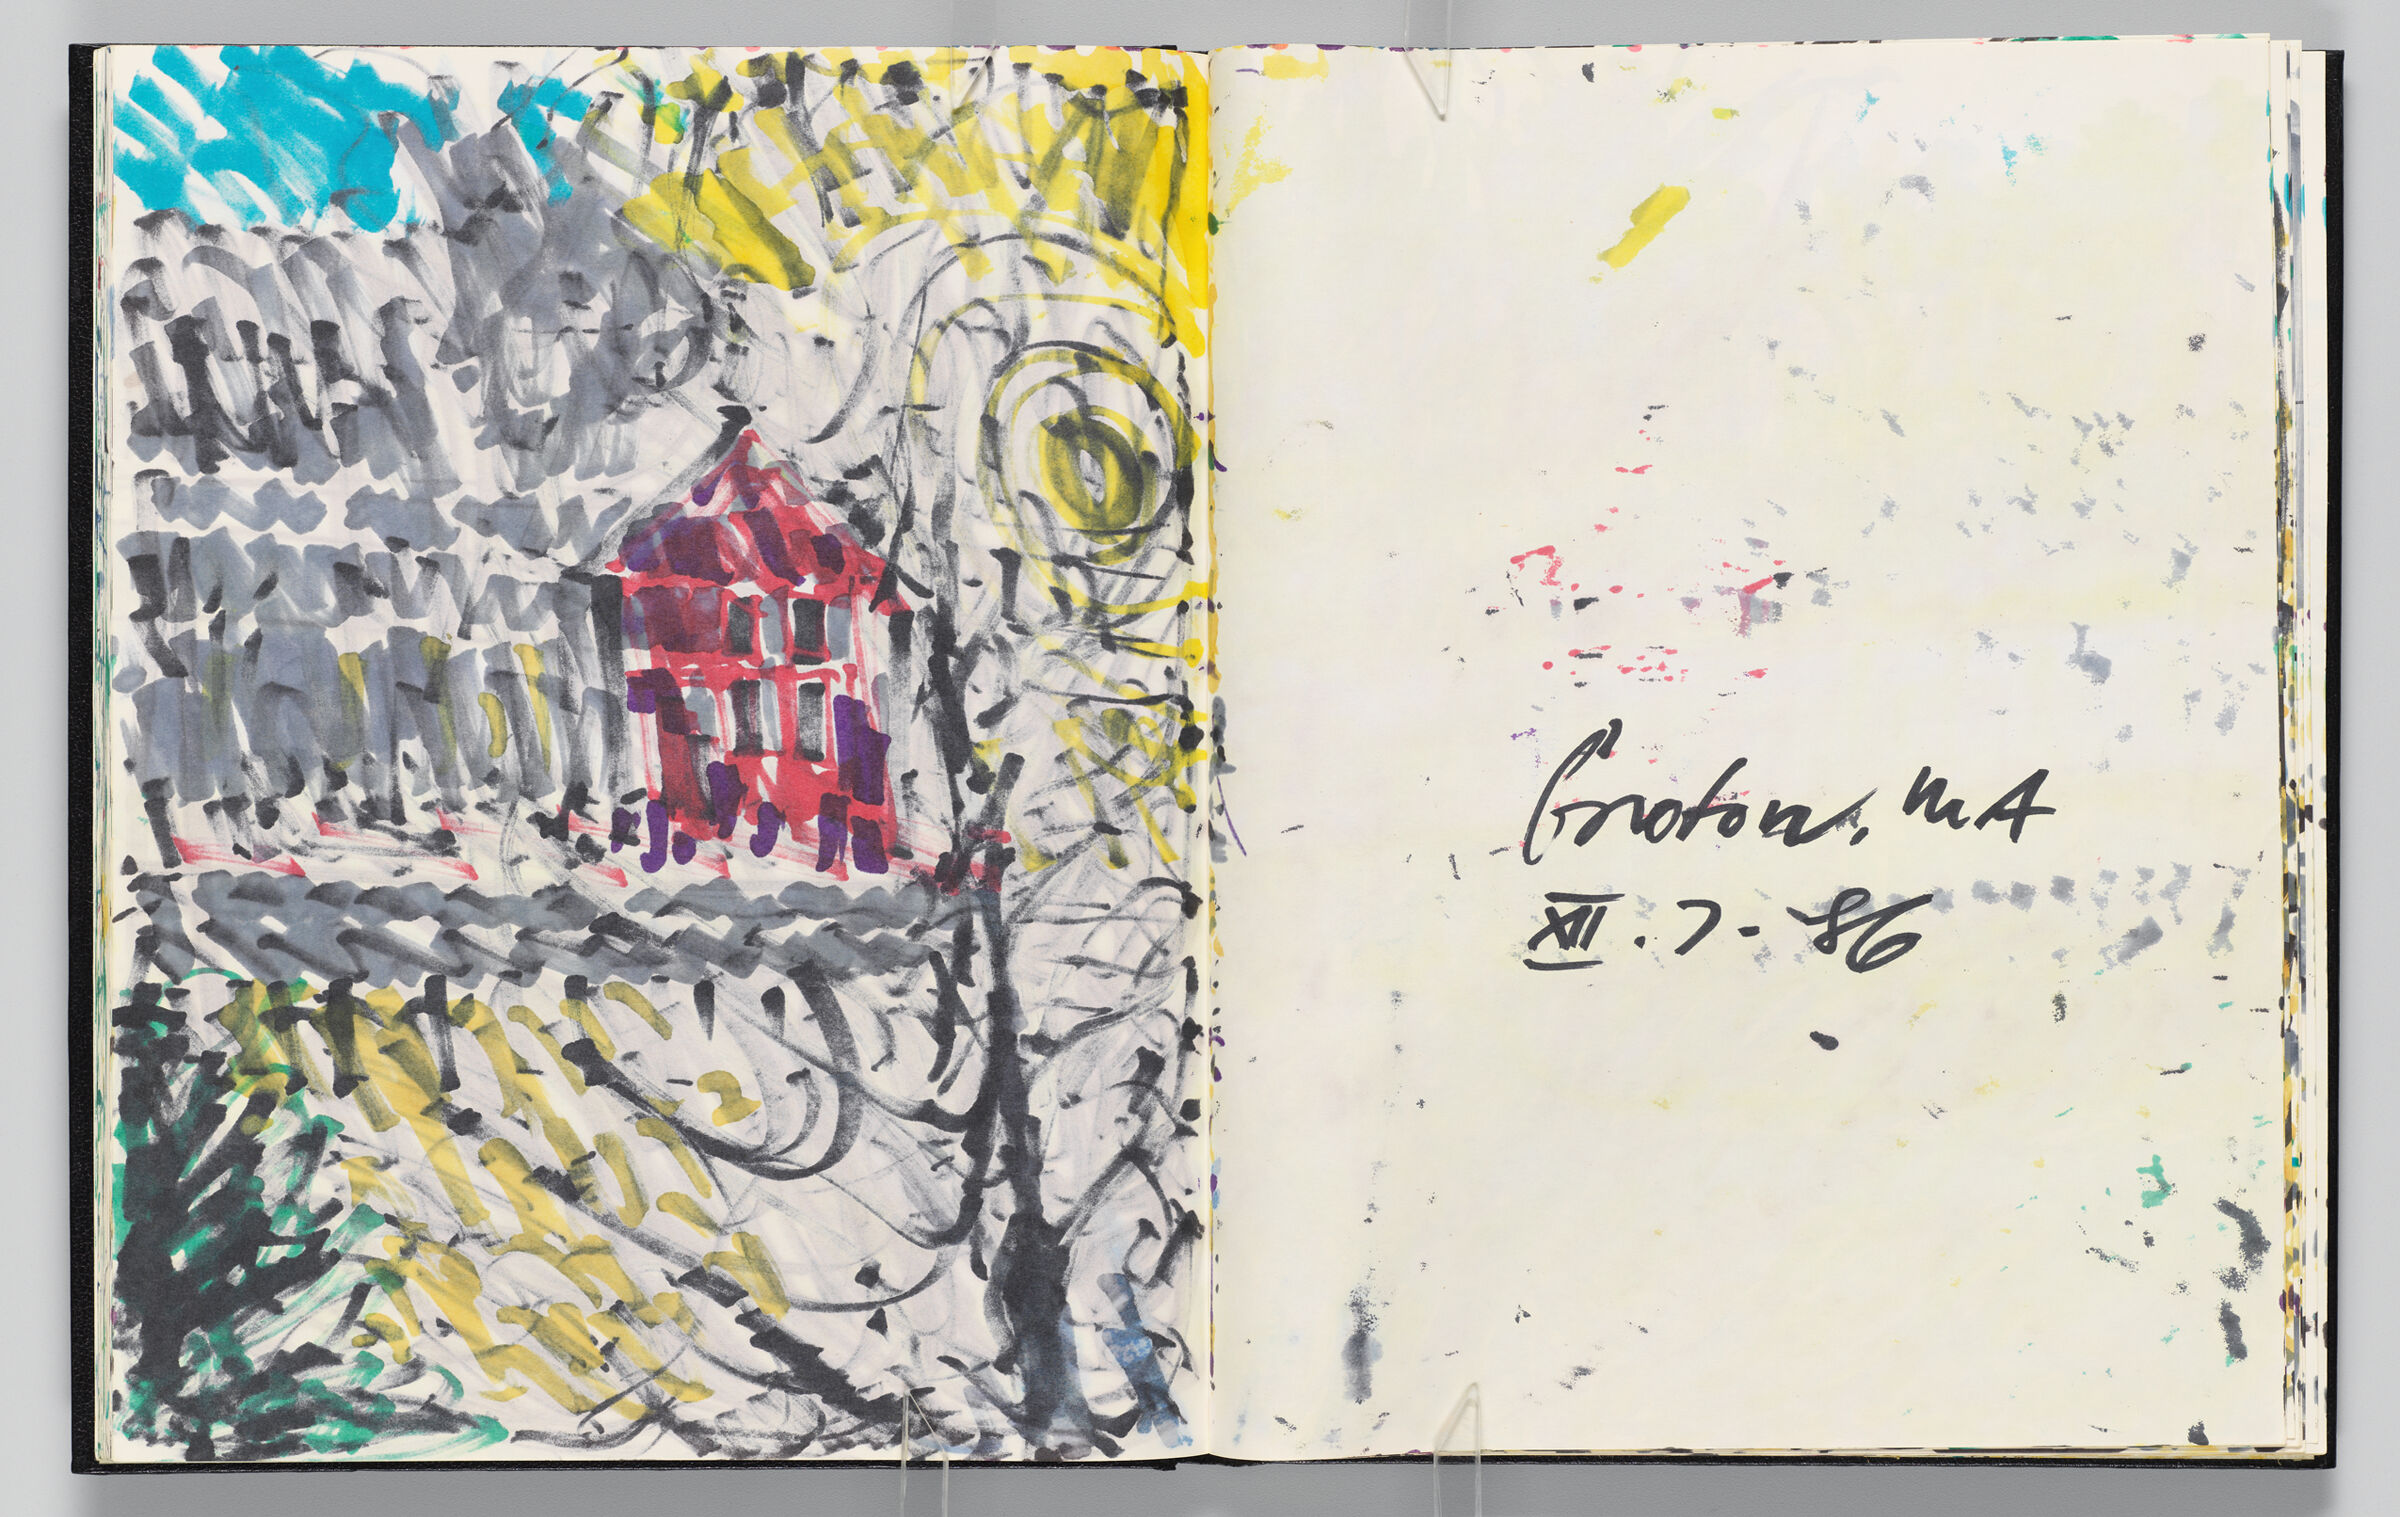 Untitled (Bleed-Through Of Previous Page, Left Page); Untitled (Note And Color Transfer, Right Page)